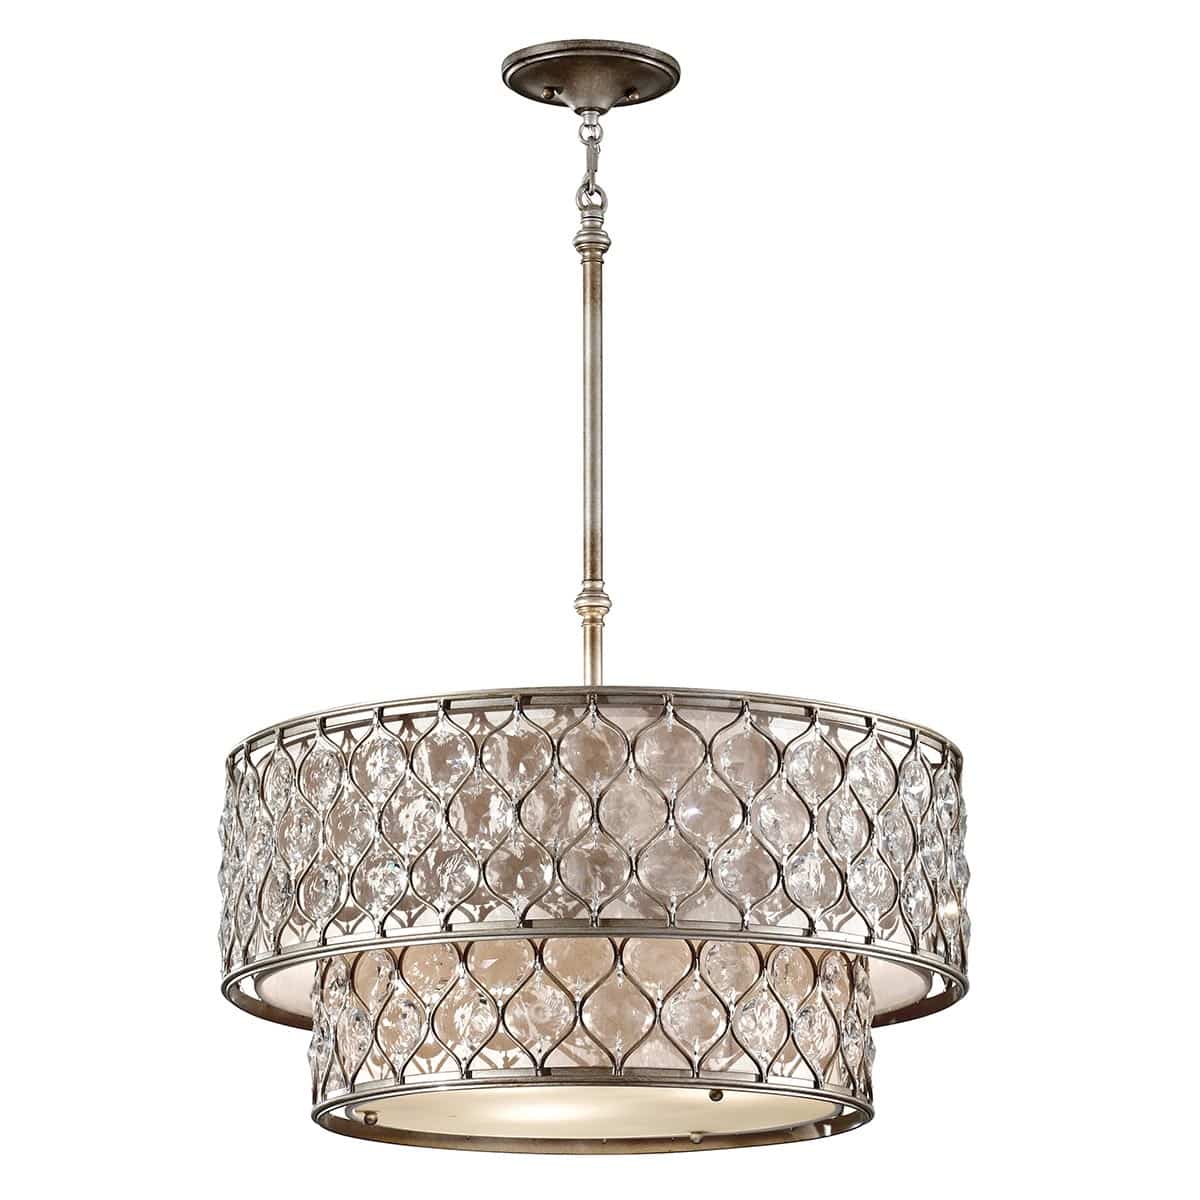 Feiss Lucia Large 6 Light Burnished Silver 2-Tier Crystal Ceiling Pendant